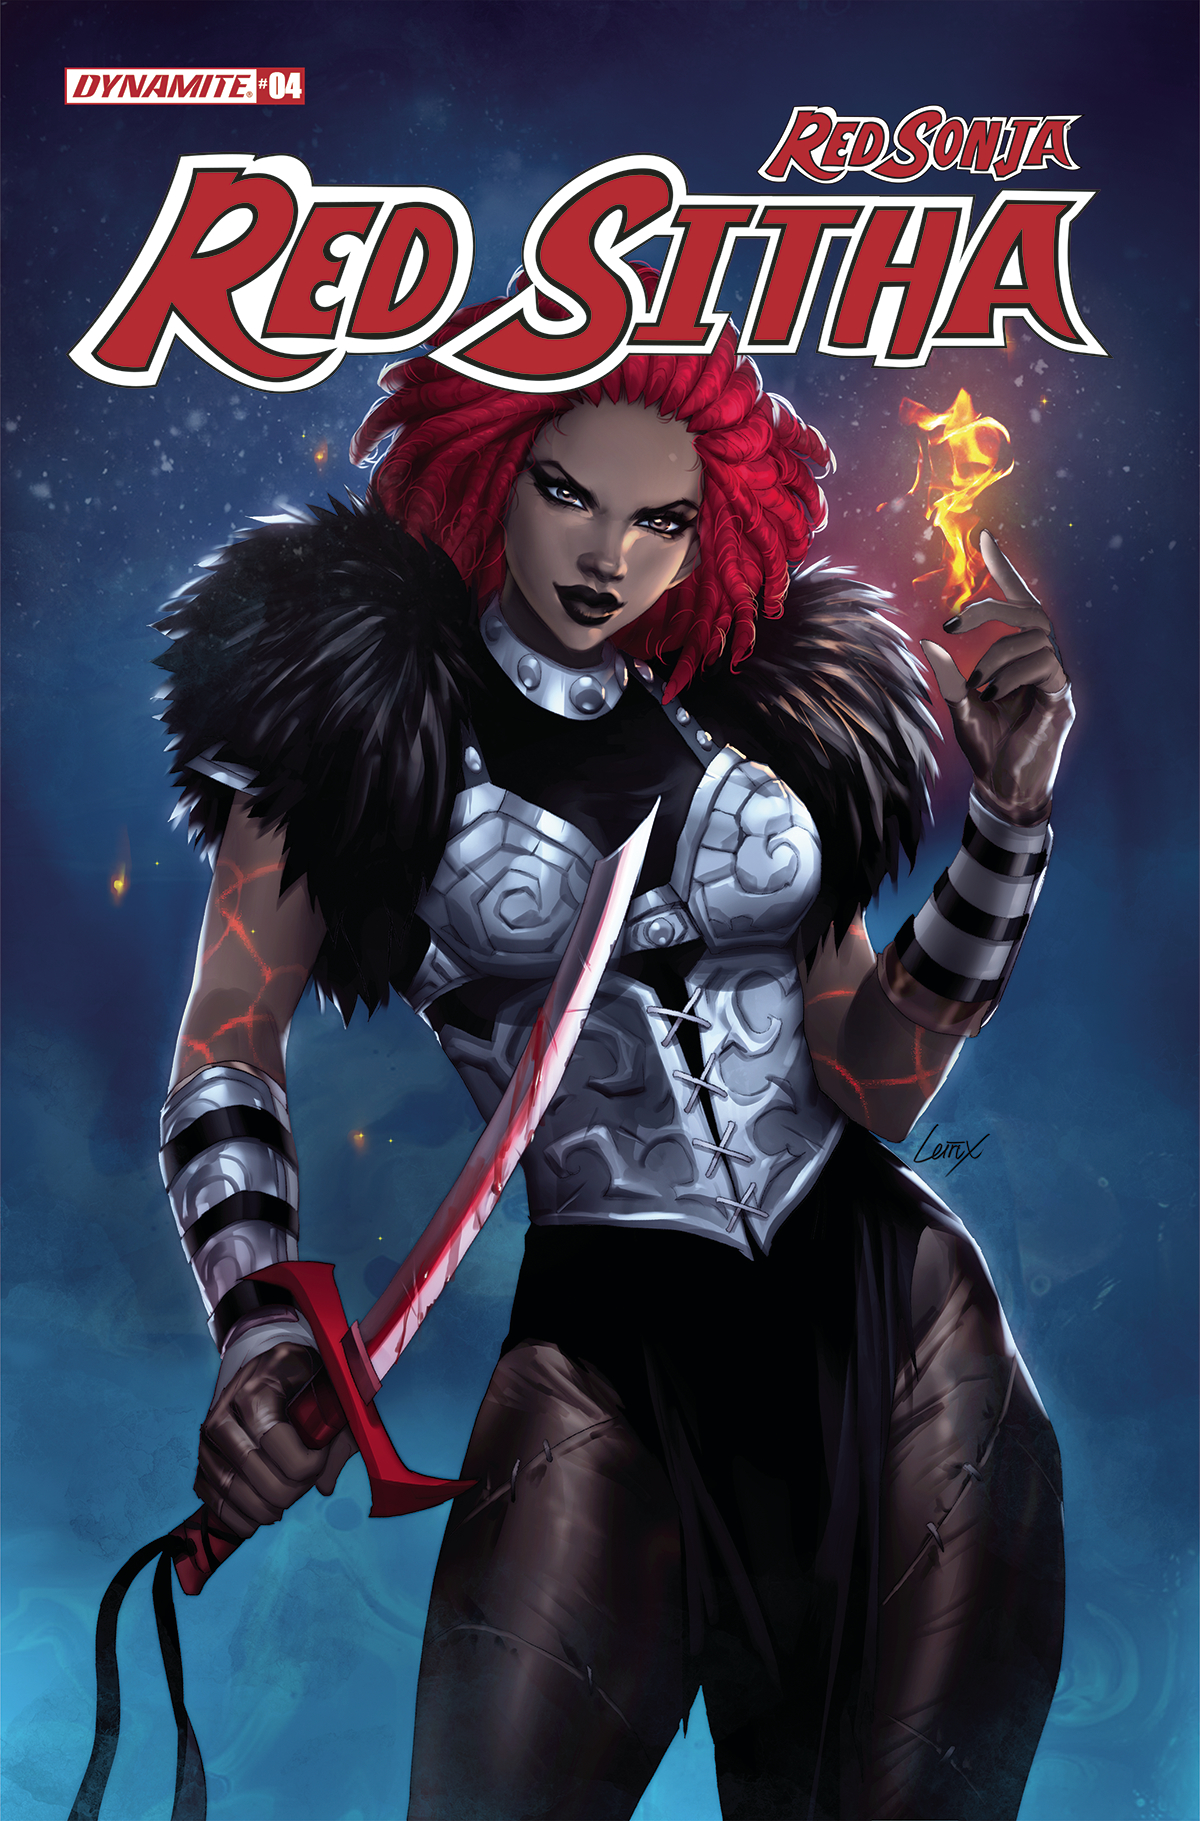 Red Sonja Red Sitha #4 Cover C Leirix